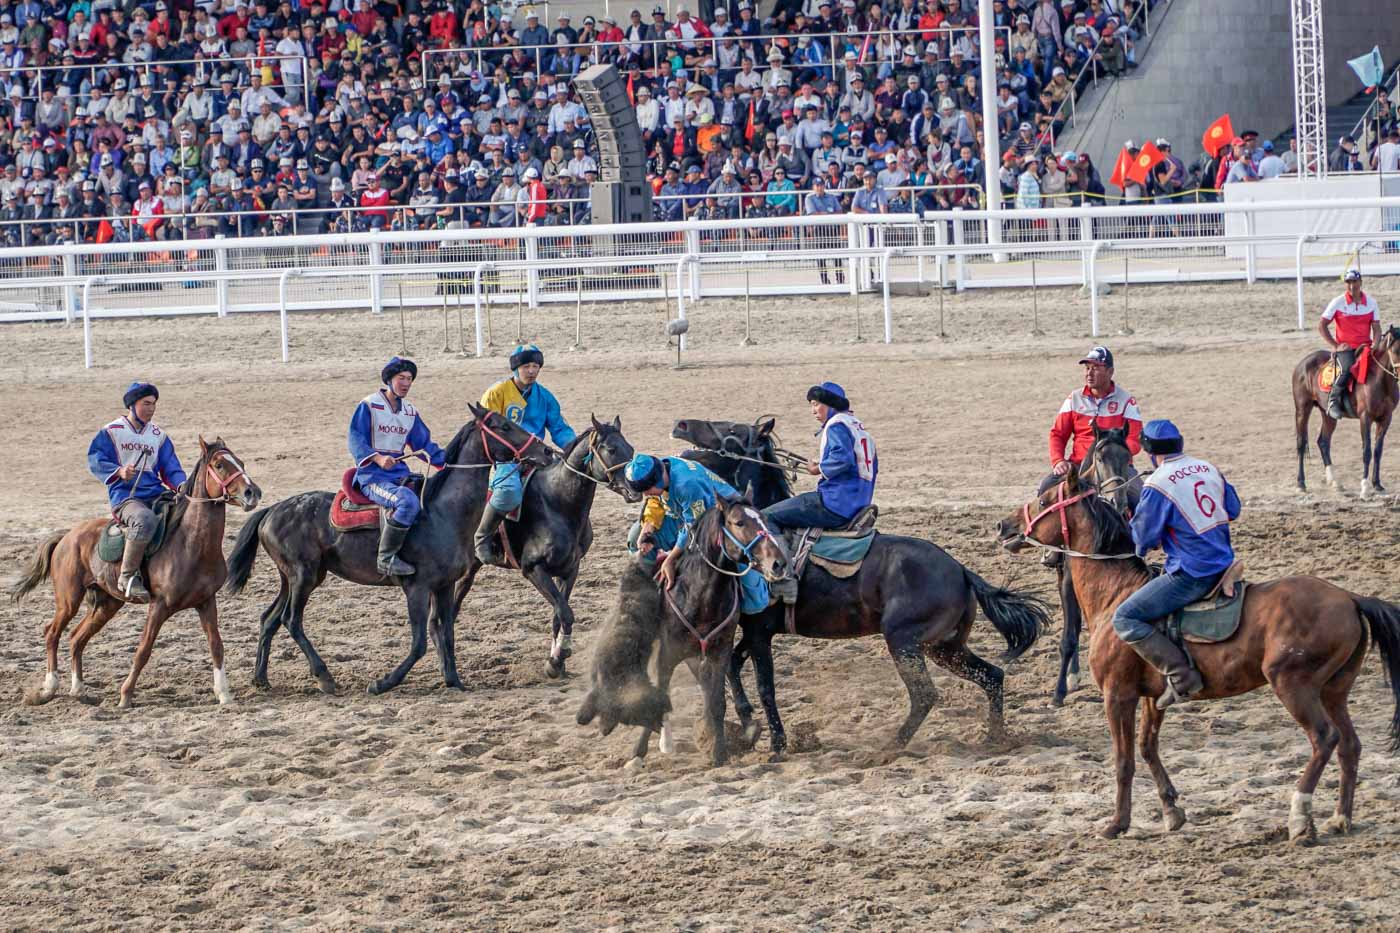 Kok Boru match between Russia and Kazakhstan at the world nomad games